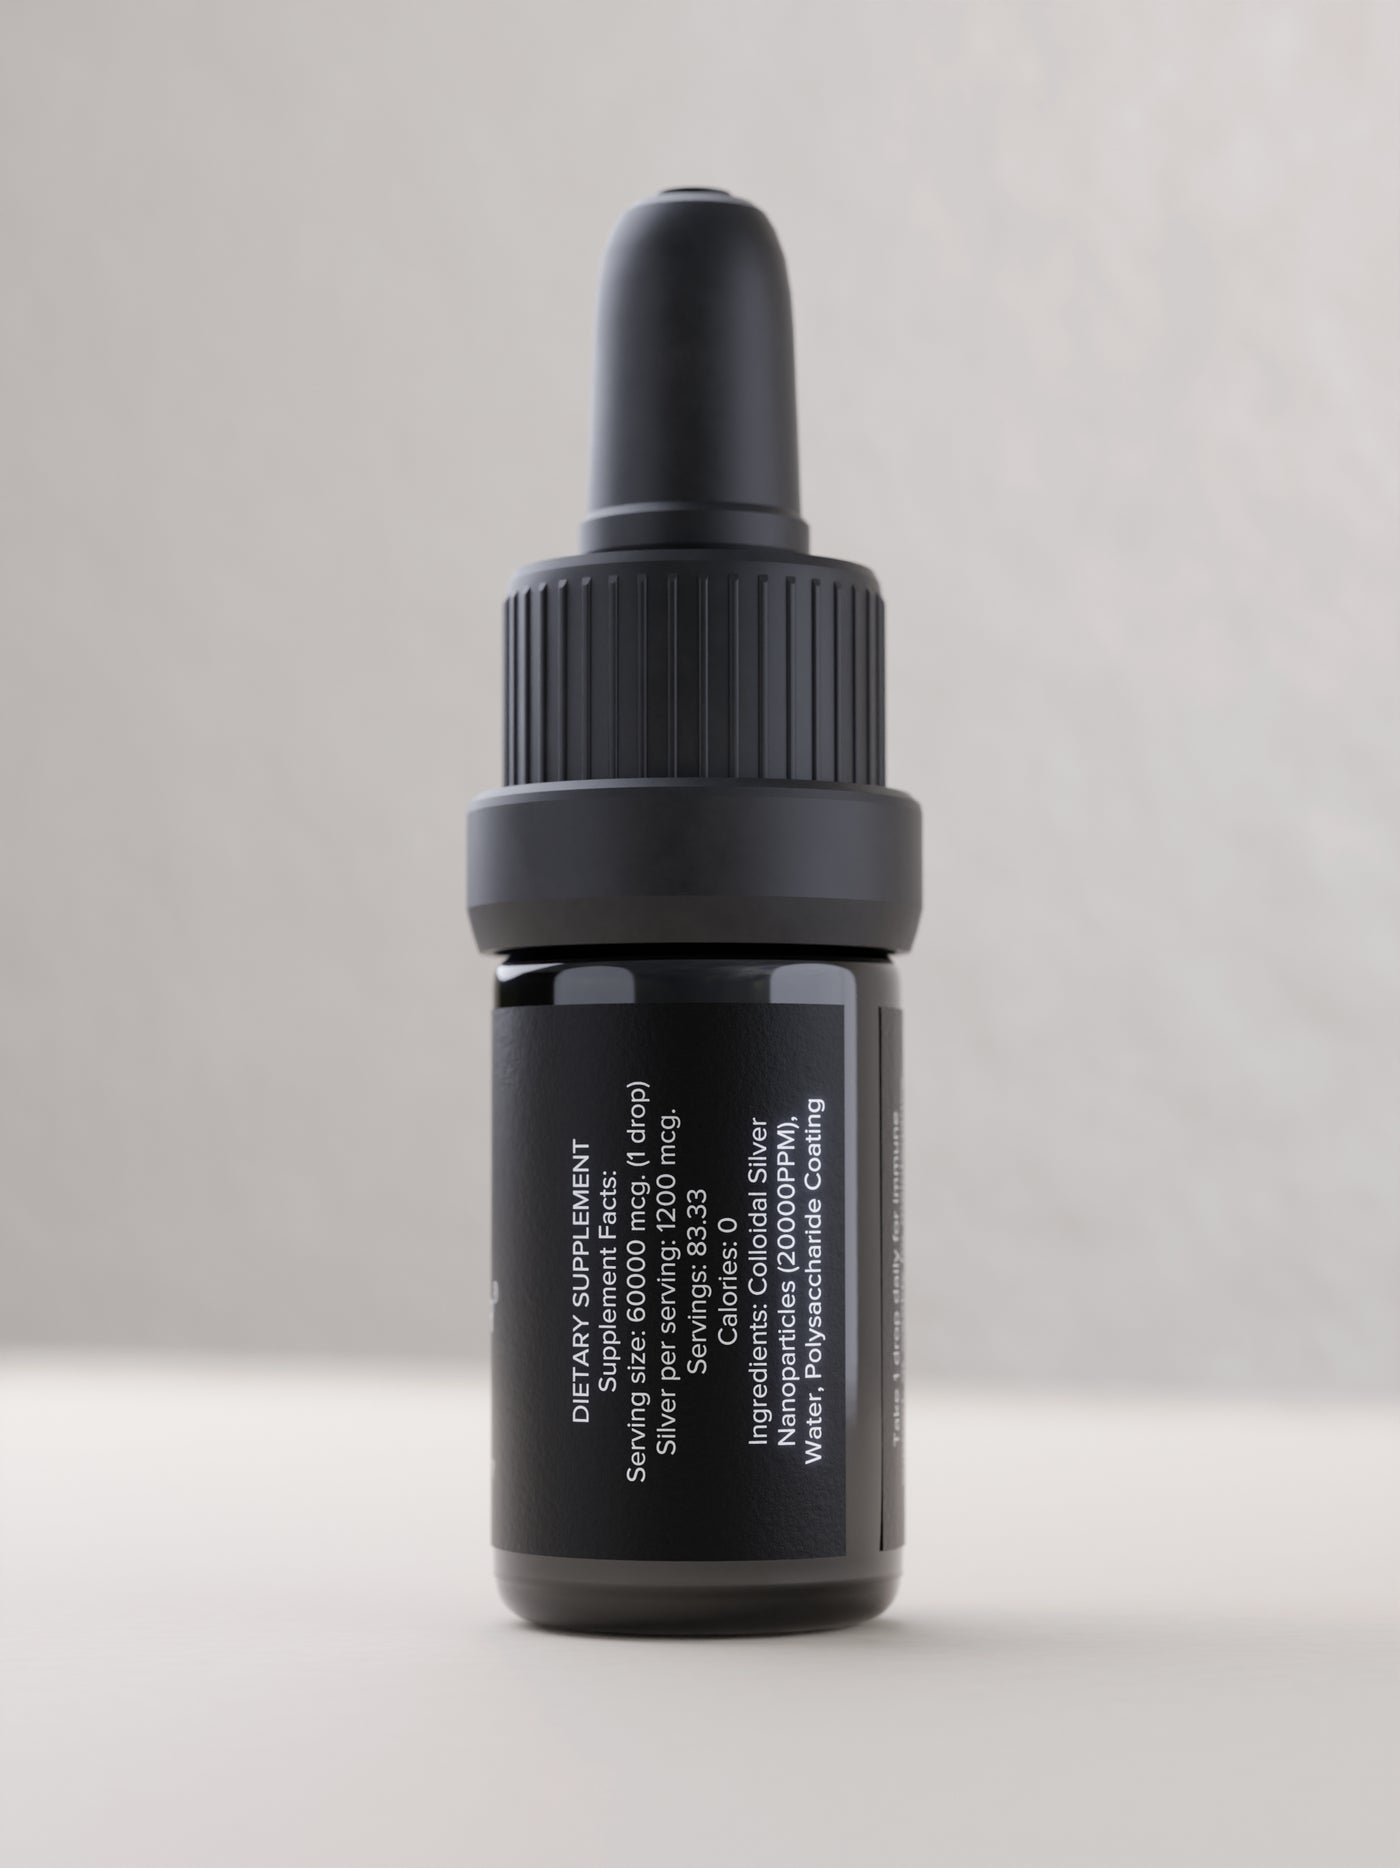 Colloidal Coated Silver Concentrate 20000 PPM 5 ml | 15 ml | 30 ml